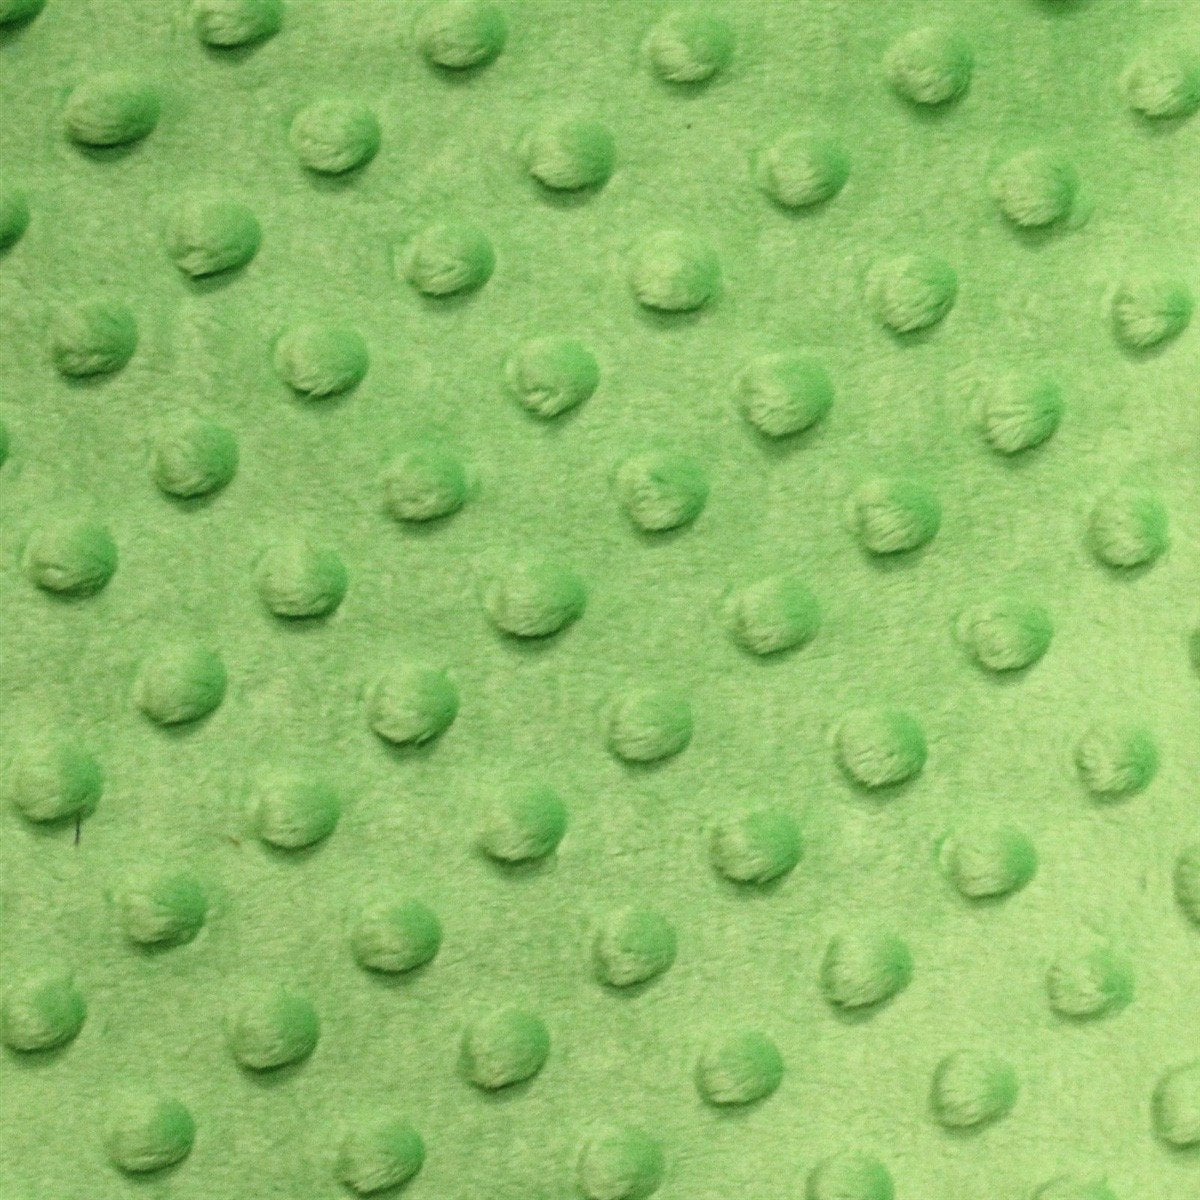 Alison LIME GREEN Embossed Dimple Dots Soft Velvety Faux Fur Fabric by the Yard - 10090